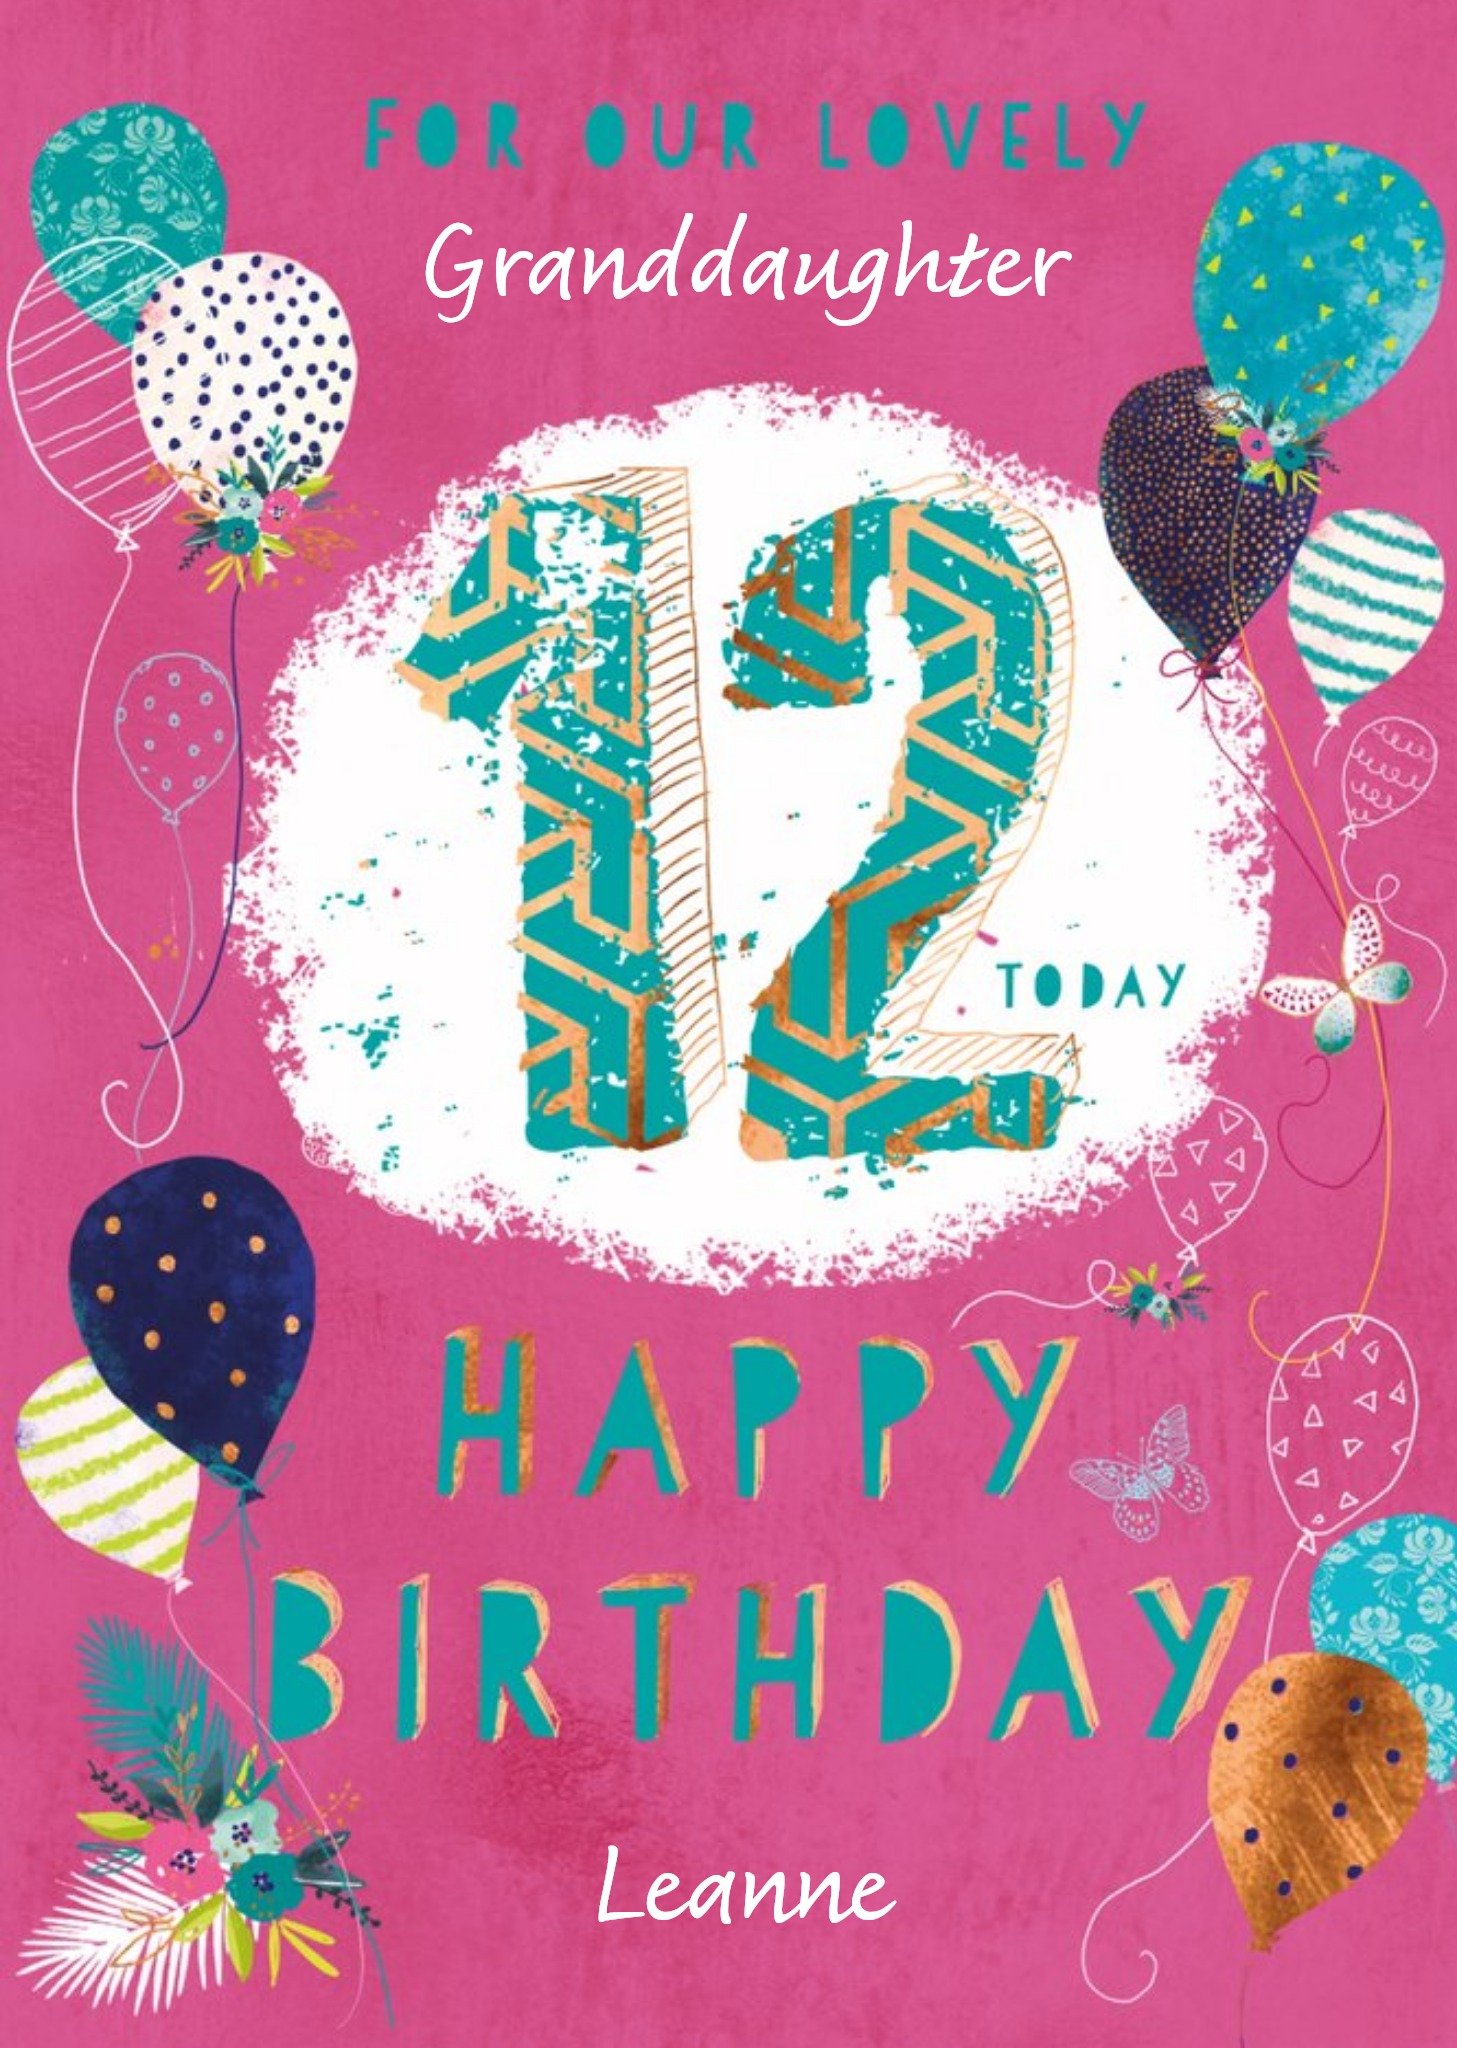 Ling Design Illustrations Of Balloons Flowers And Butterflies Granddaughter's Twelfth Birthday Card,